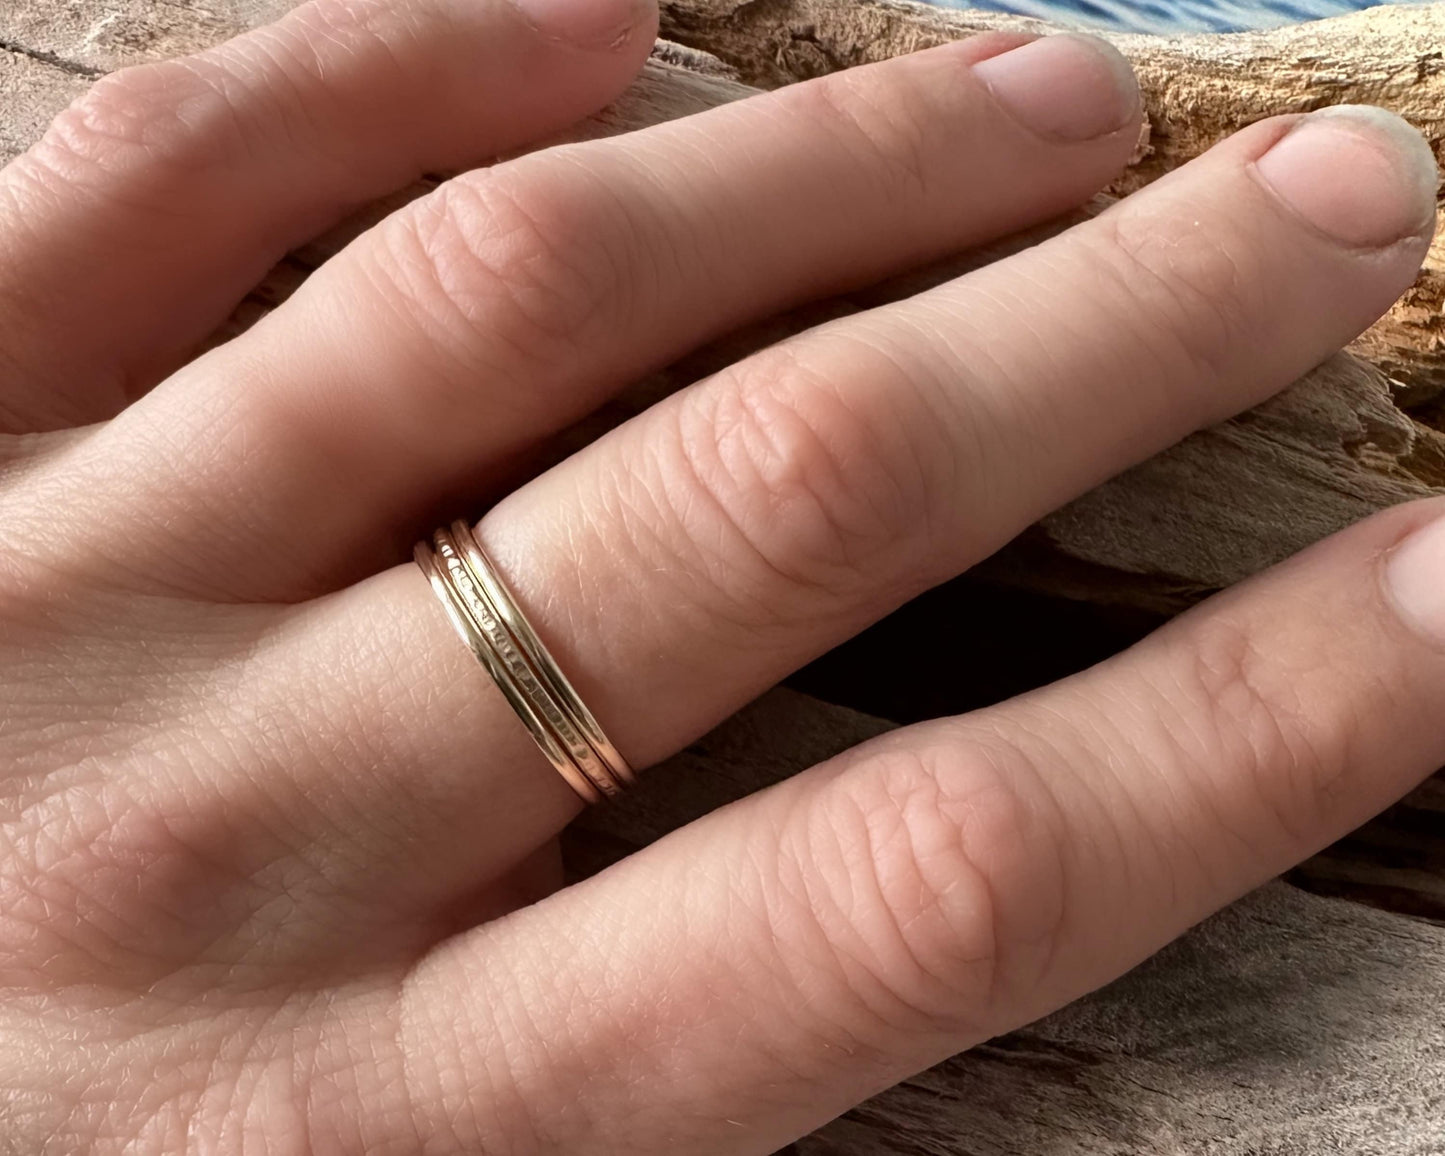 Solid 9ct Gold Stack of Three Stacking Rings, Hallmarked Gold Stacking Ring Set, Two Plain and Shiny and One Ripple Hammered Pattern